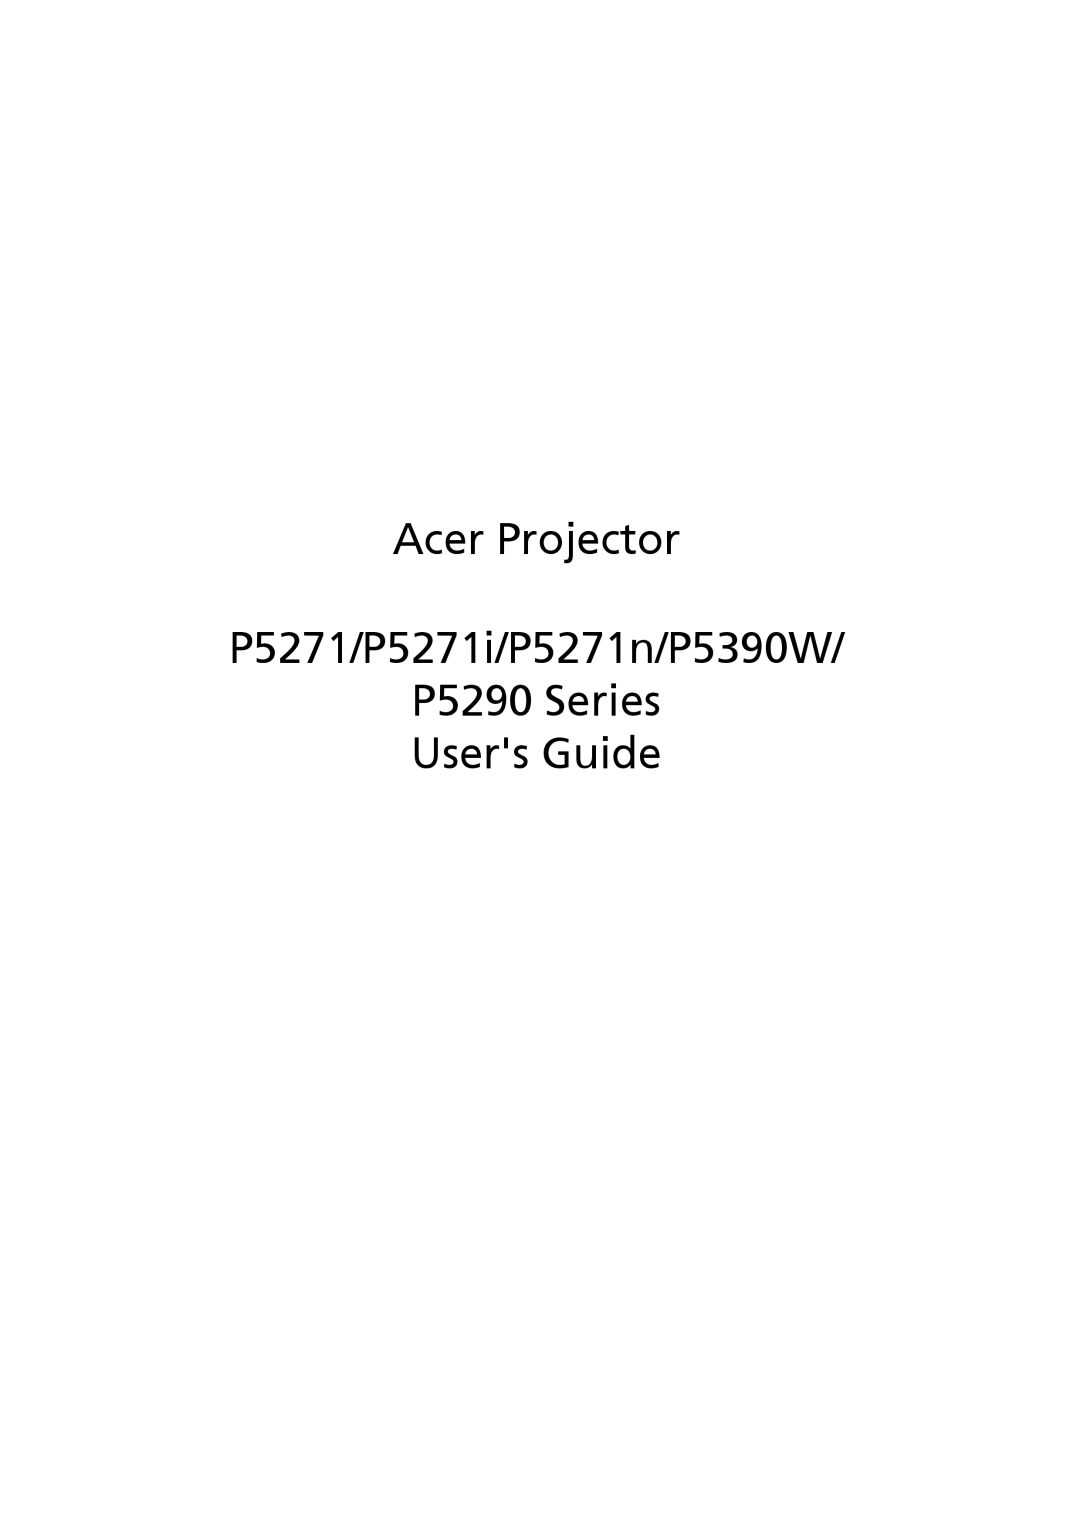 Acer manual Acer Projector P5271/P5271i/P5271n/P5390W P5290 Series Users Guide 